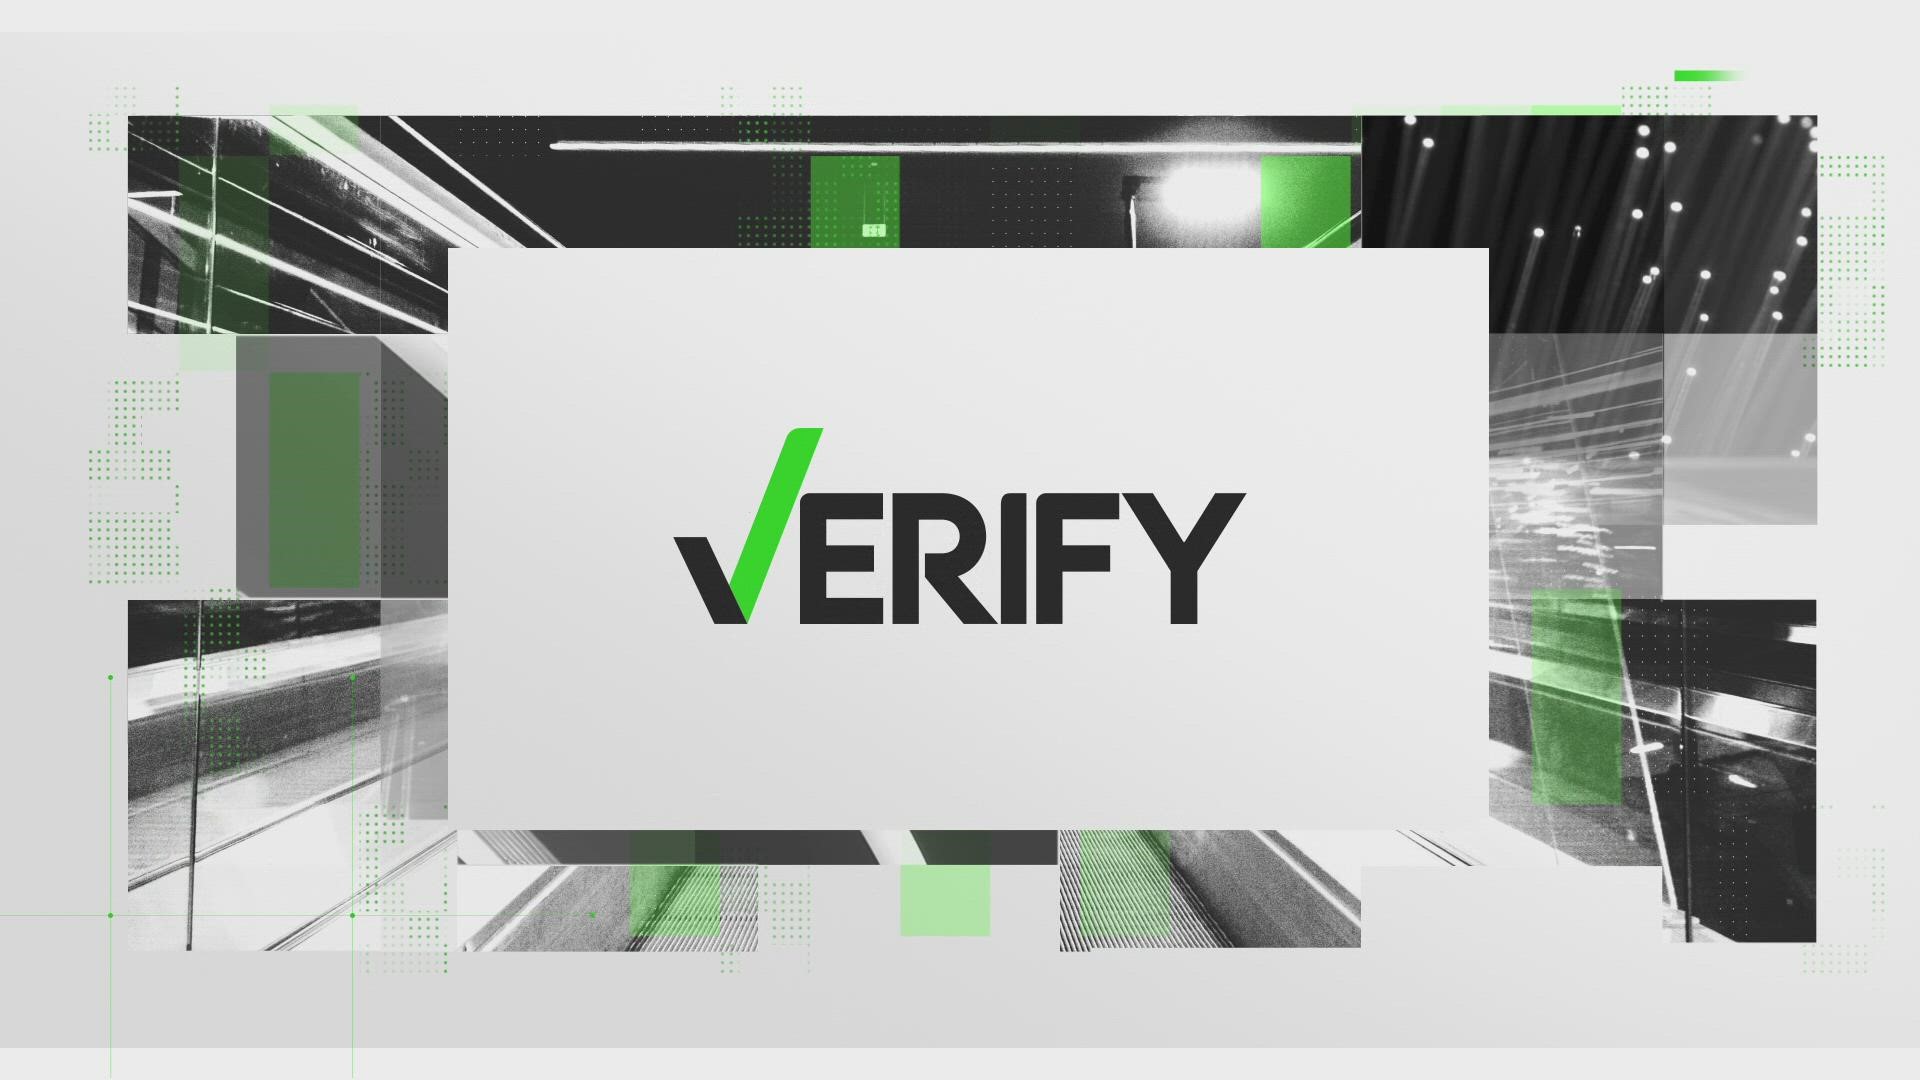 The Verify team looked into online claims about CIA funding to Islamist groups in the 1980's.